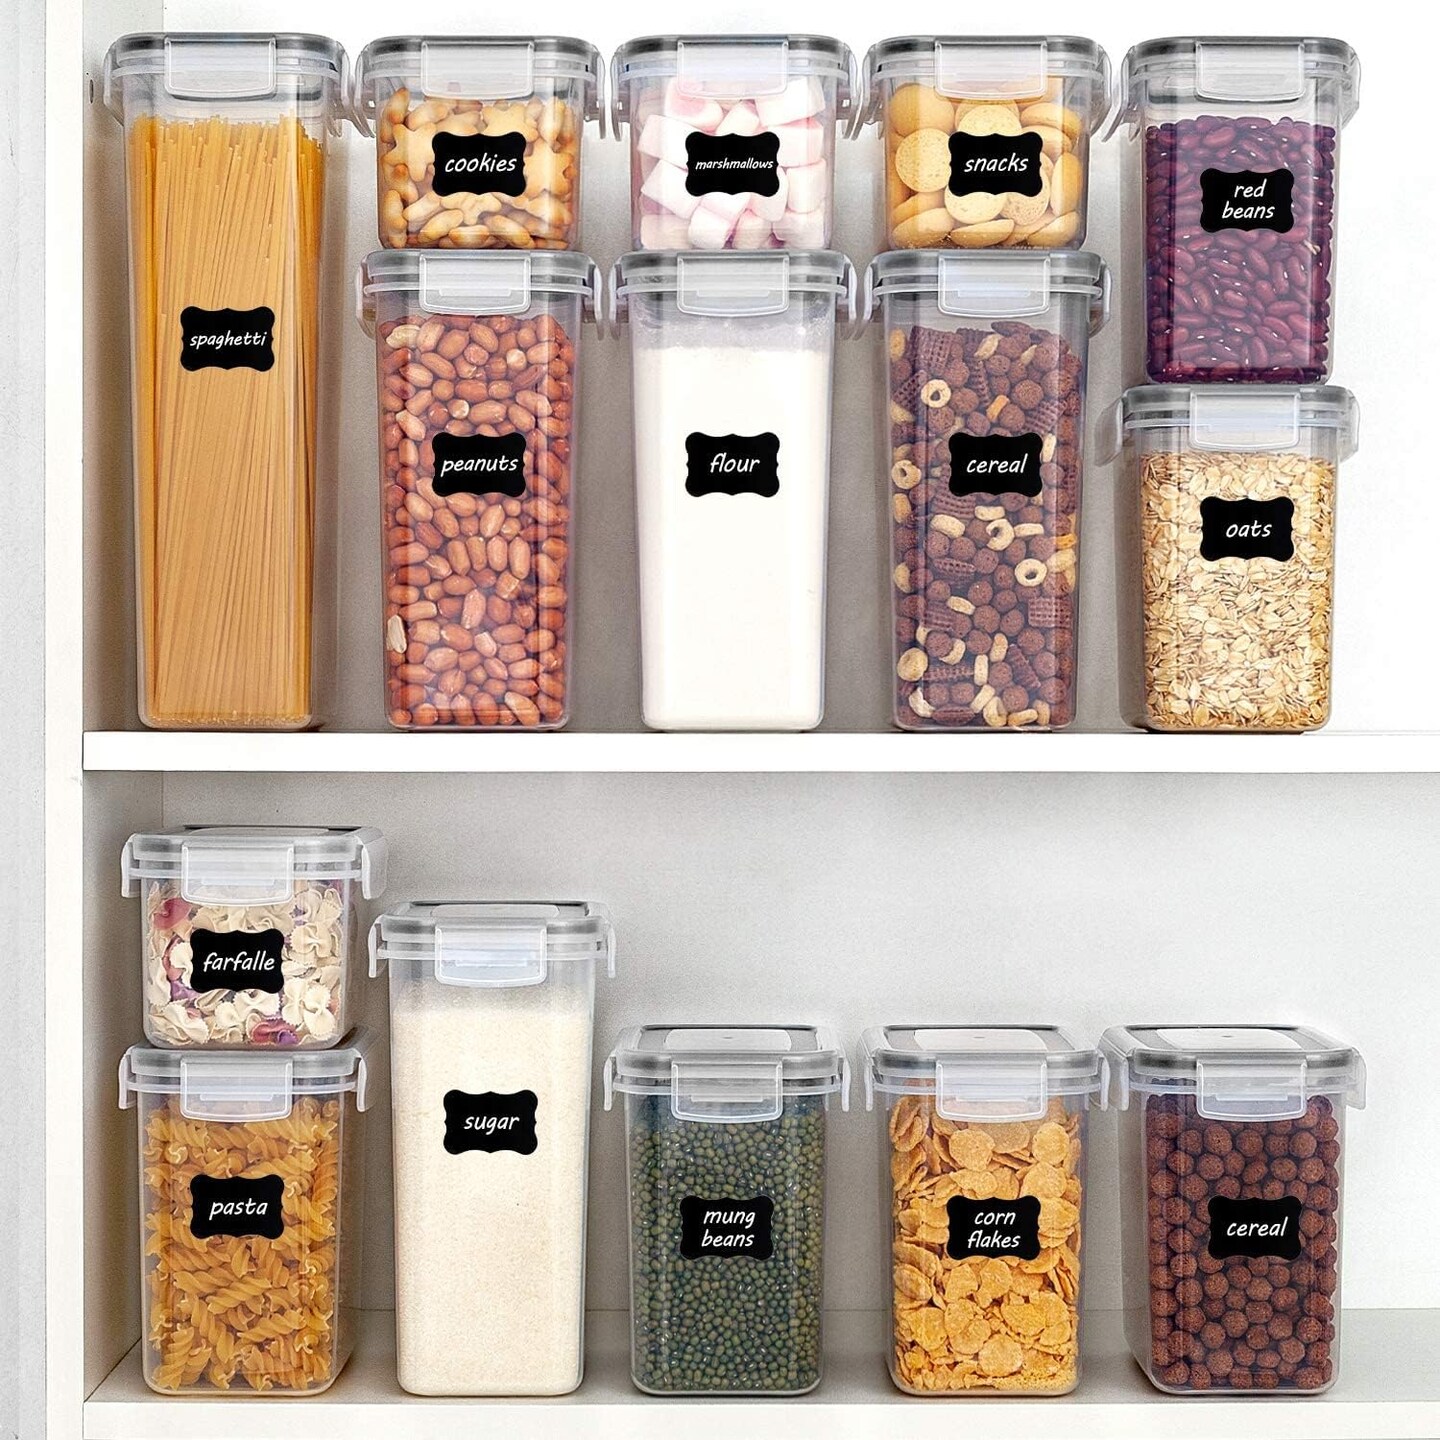  Lifetime Home 32 PACK Airtight Food Storage Containers Set with  Lids for Kitchen & Pantry Organization - BPA-Free for Cereal, Pasta, Rice,  Vegetables, Fruits & Flour - FREE Markers and Labels